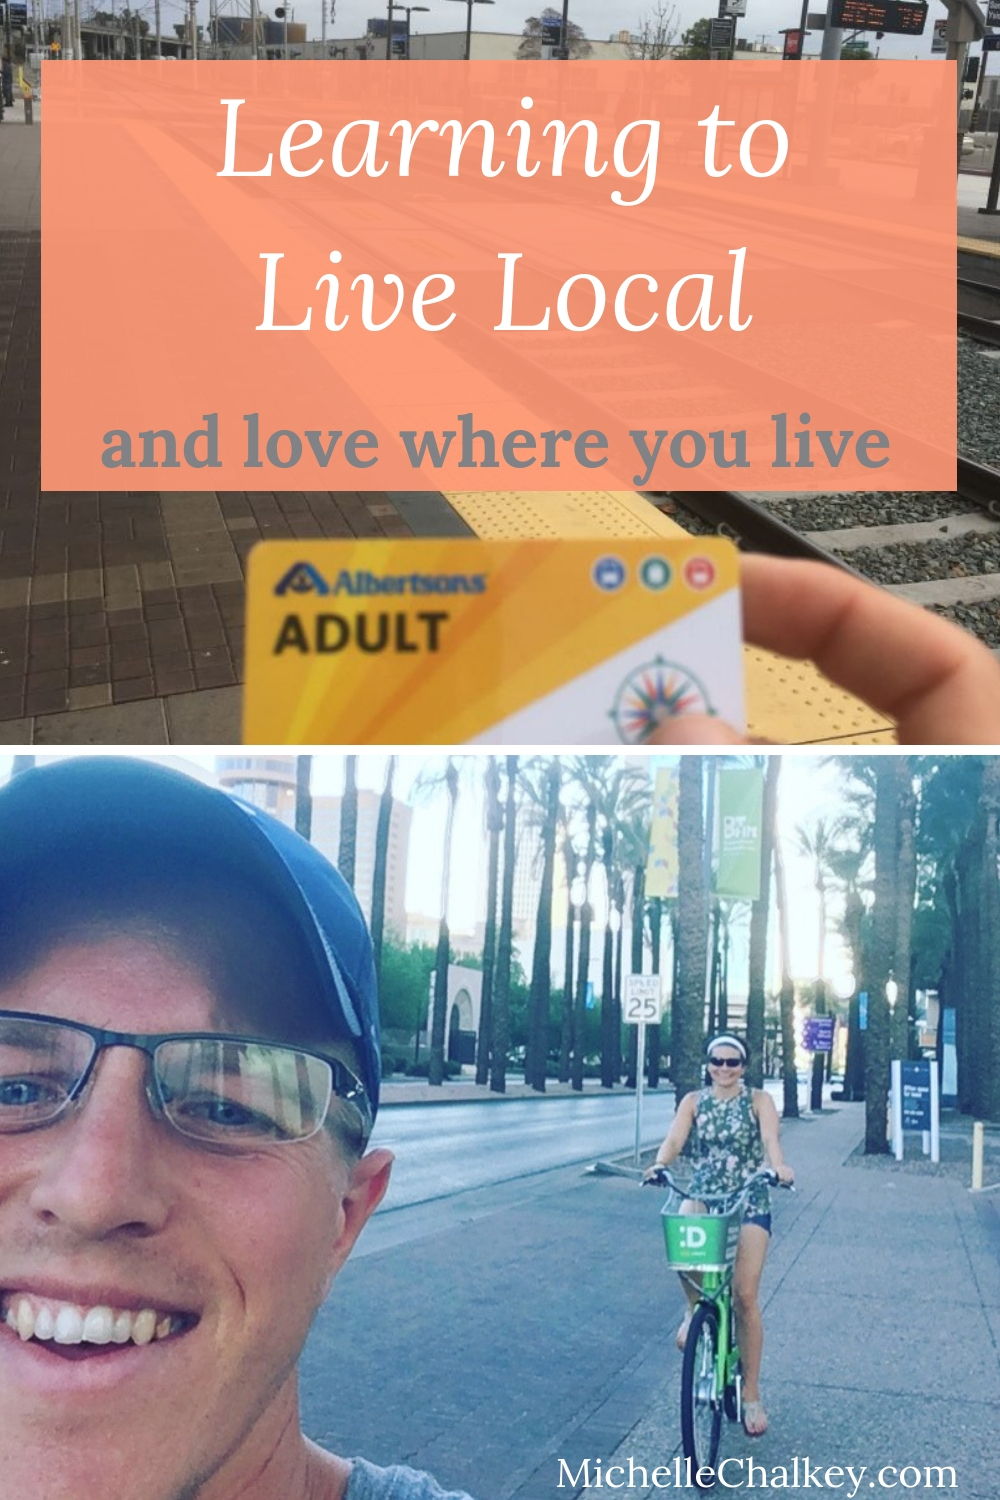 7 tips to live more local and embrace where you live